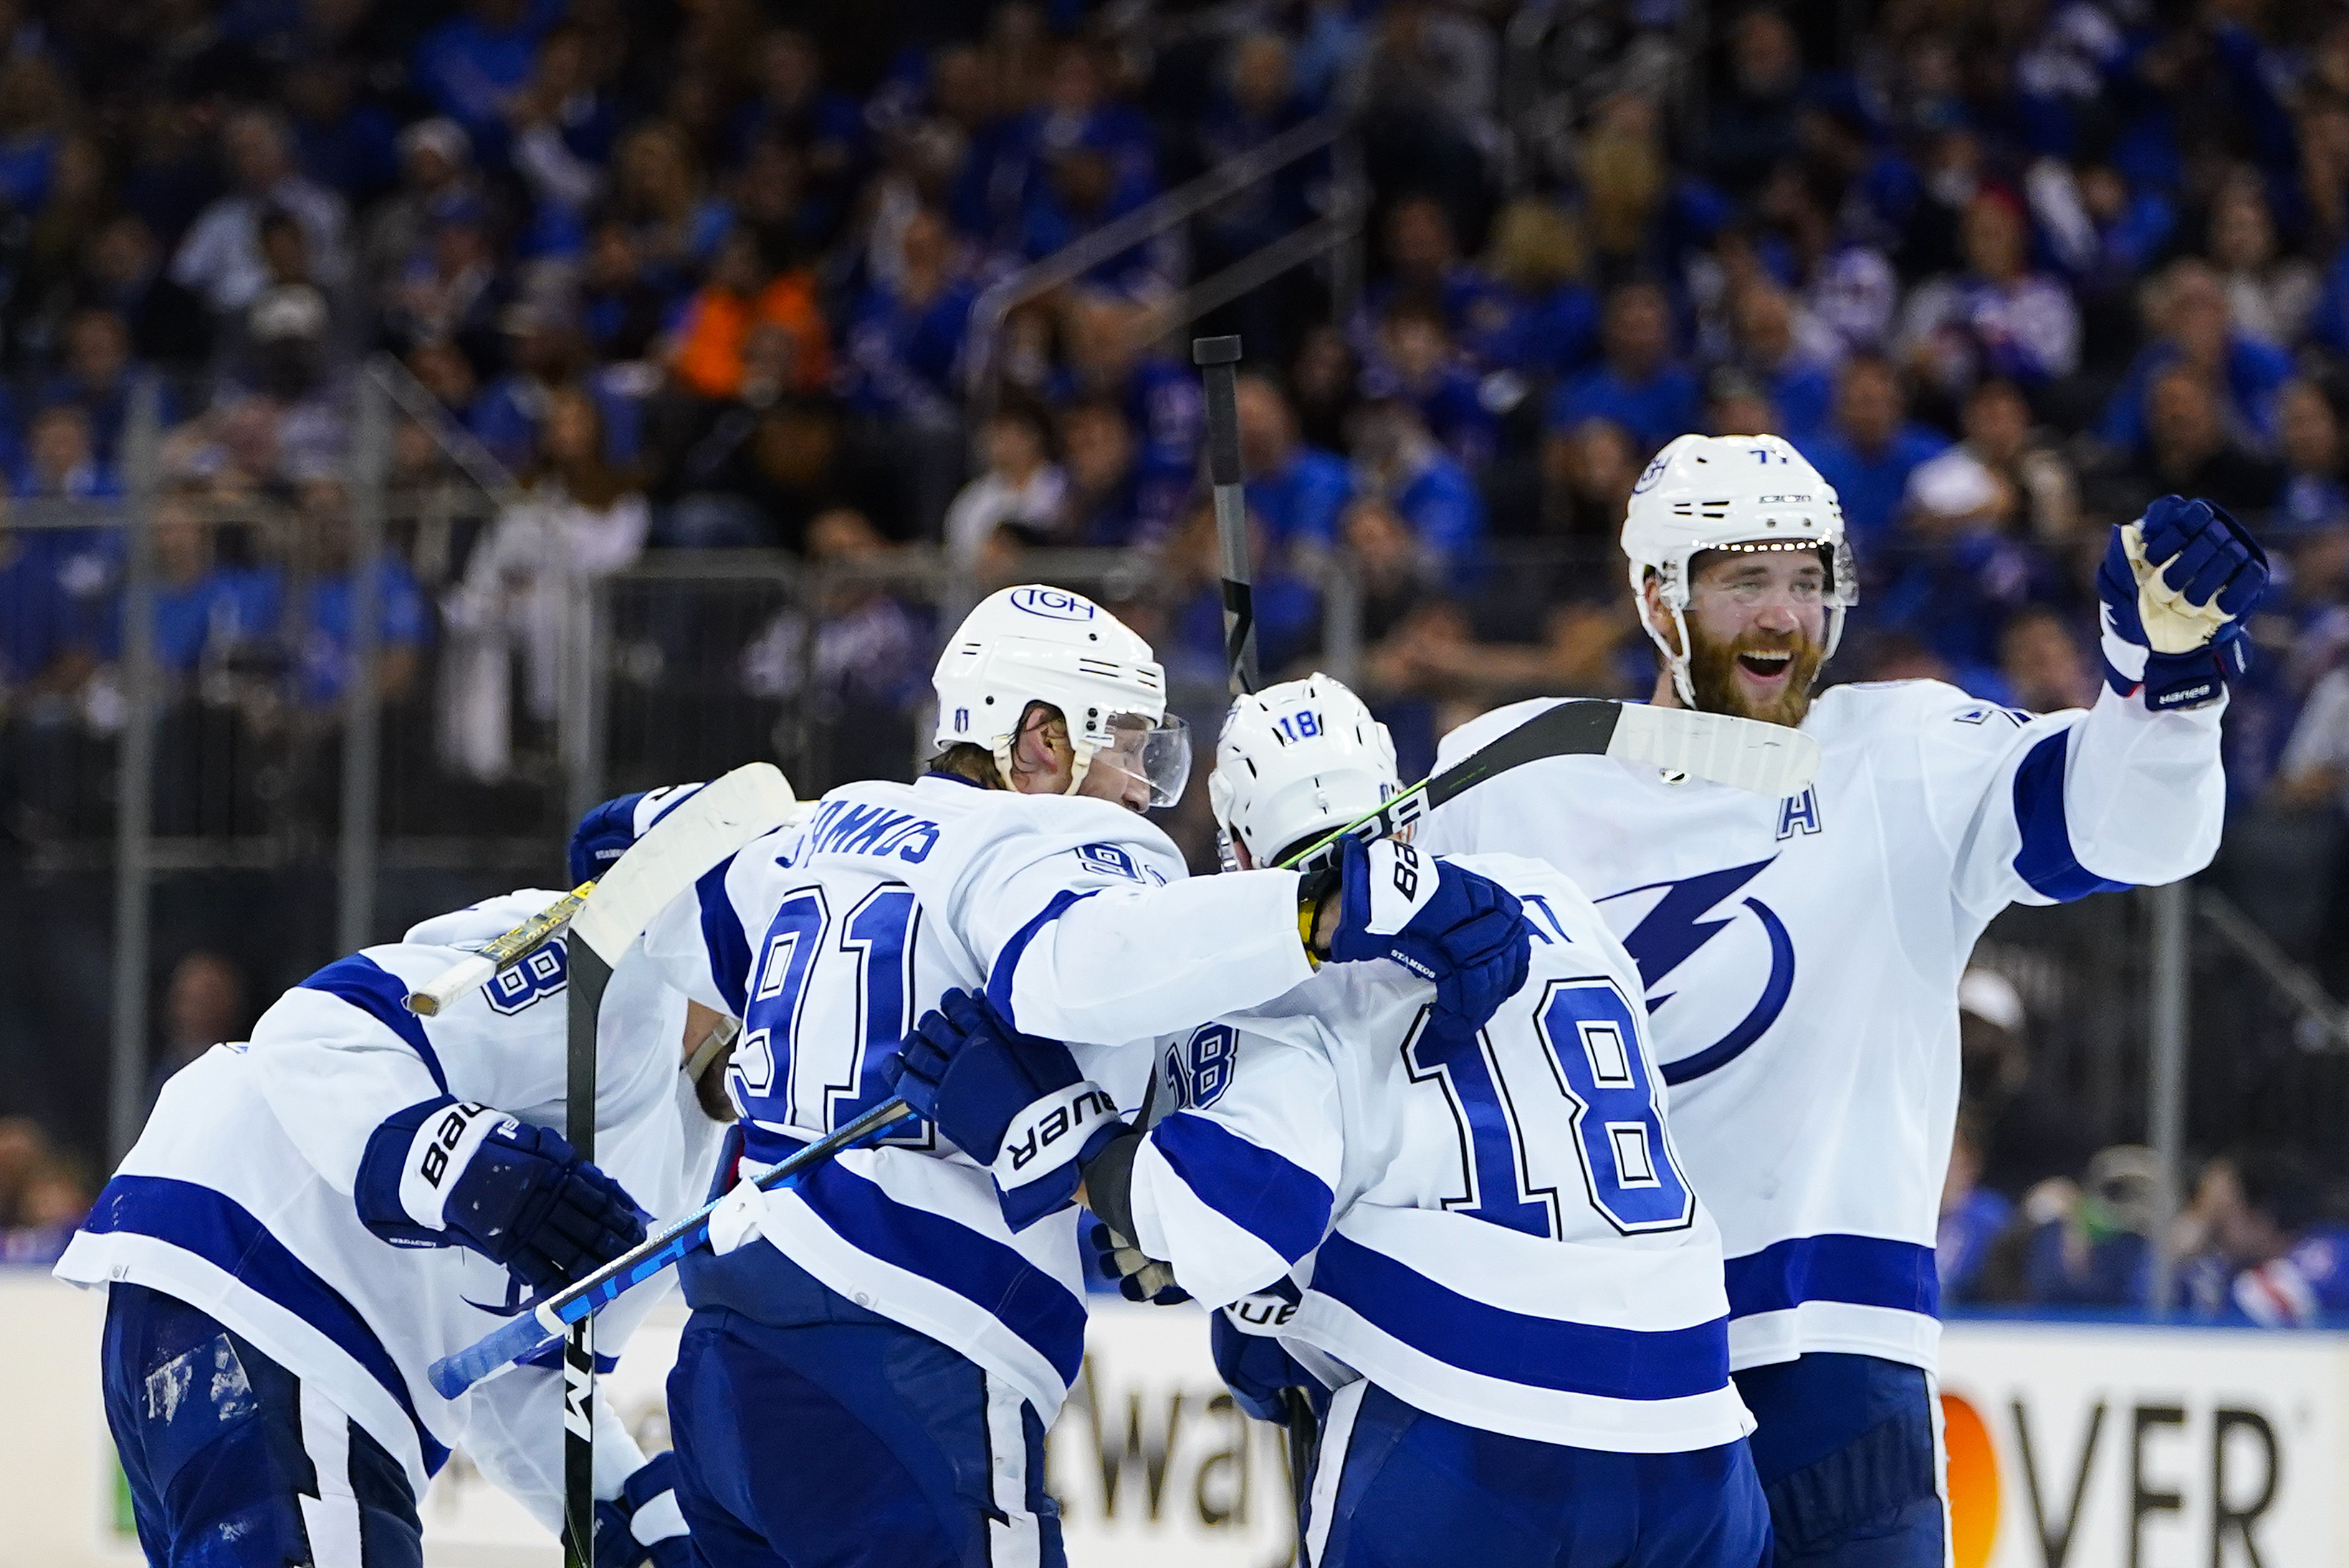 Lightning Stanley Cup 3-peat could create dynasty like no other